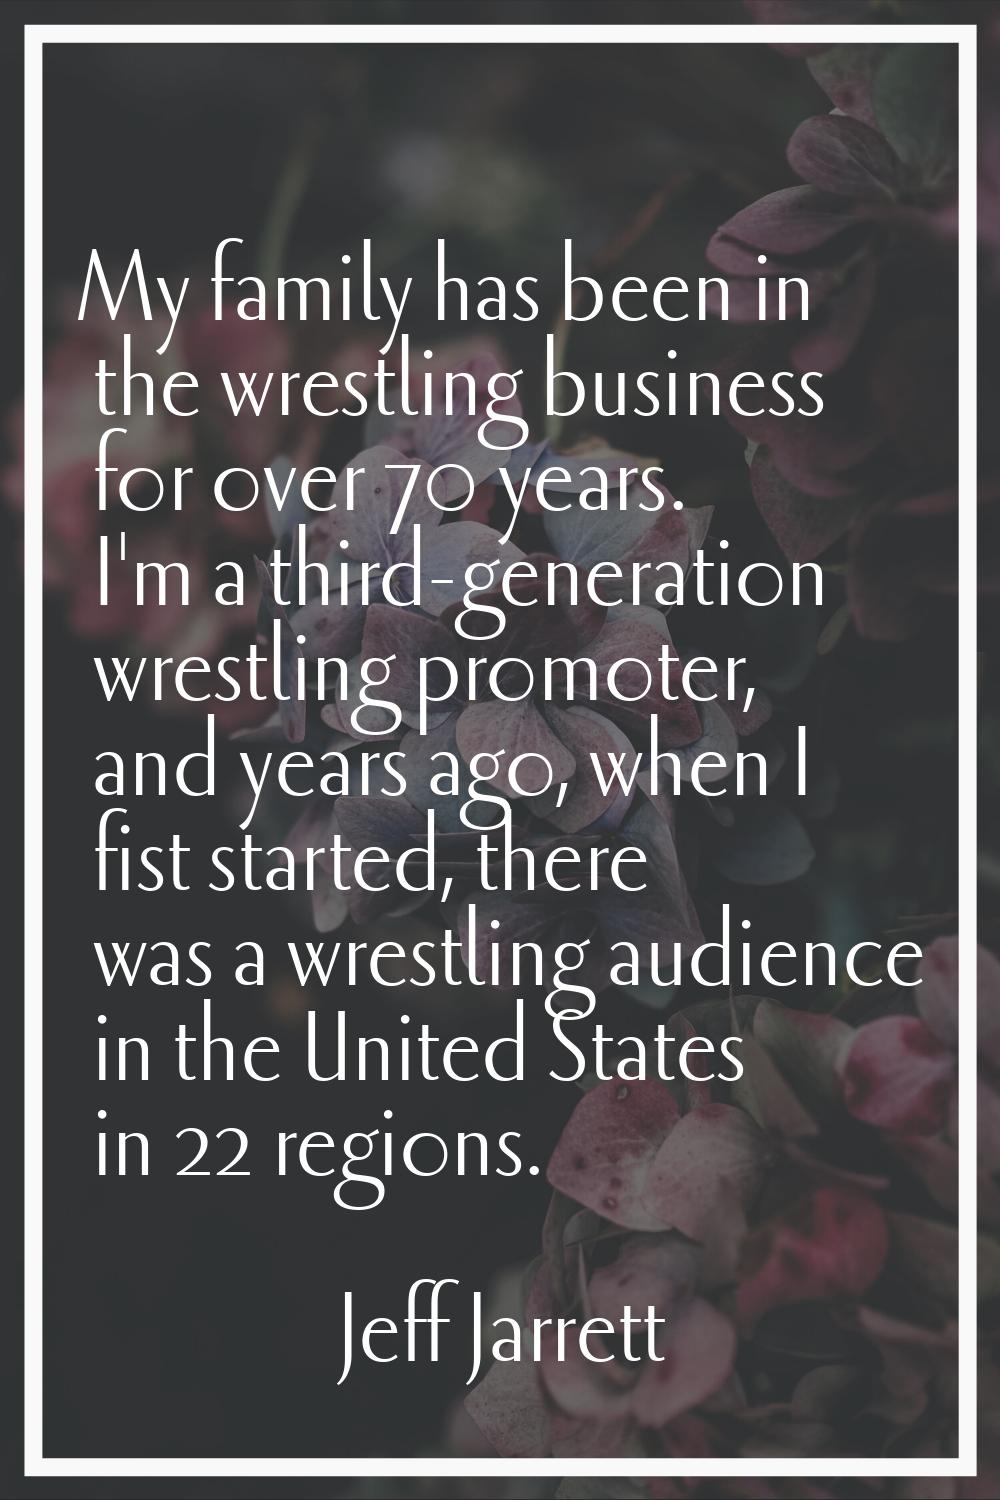 My family has been in the wrestling business for over 70 years. I'm a third-generation wrestling pr